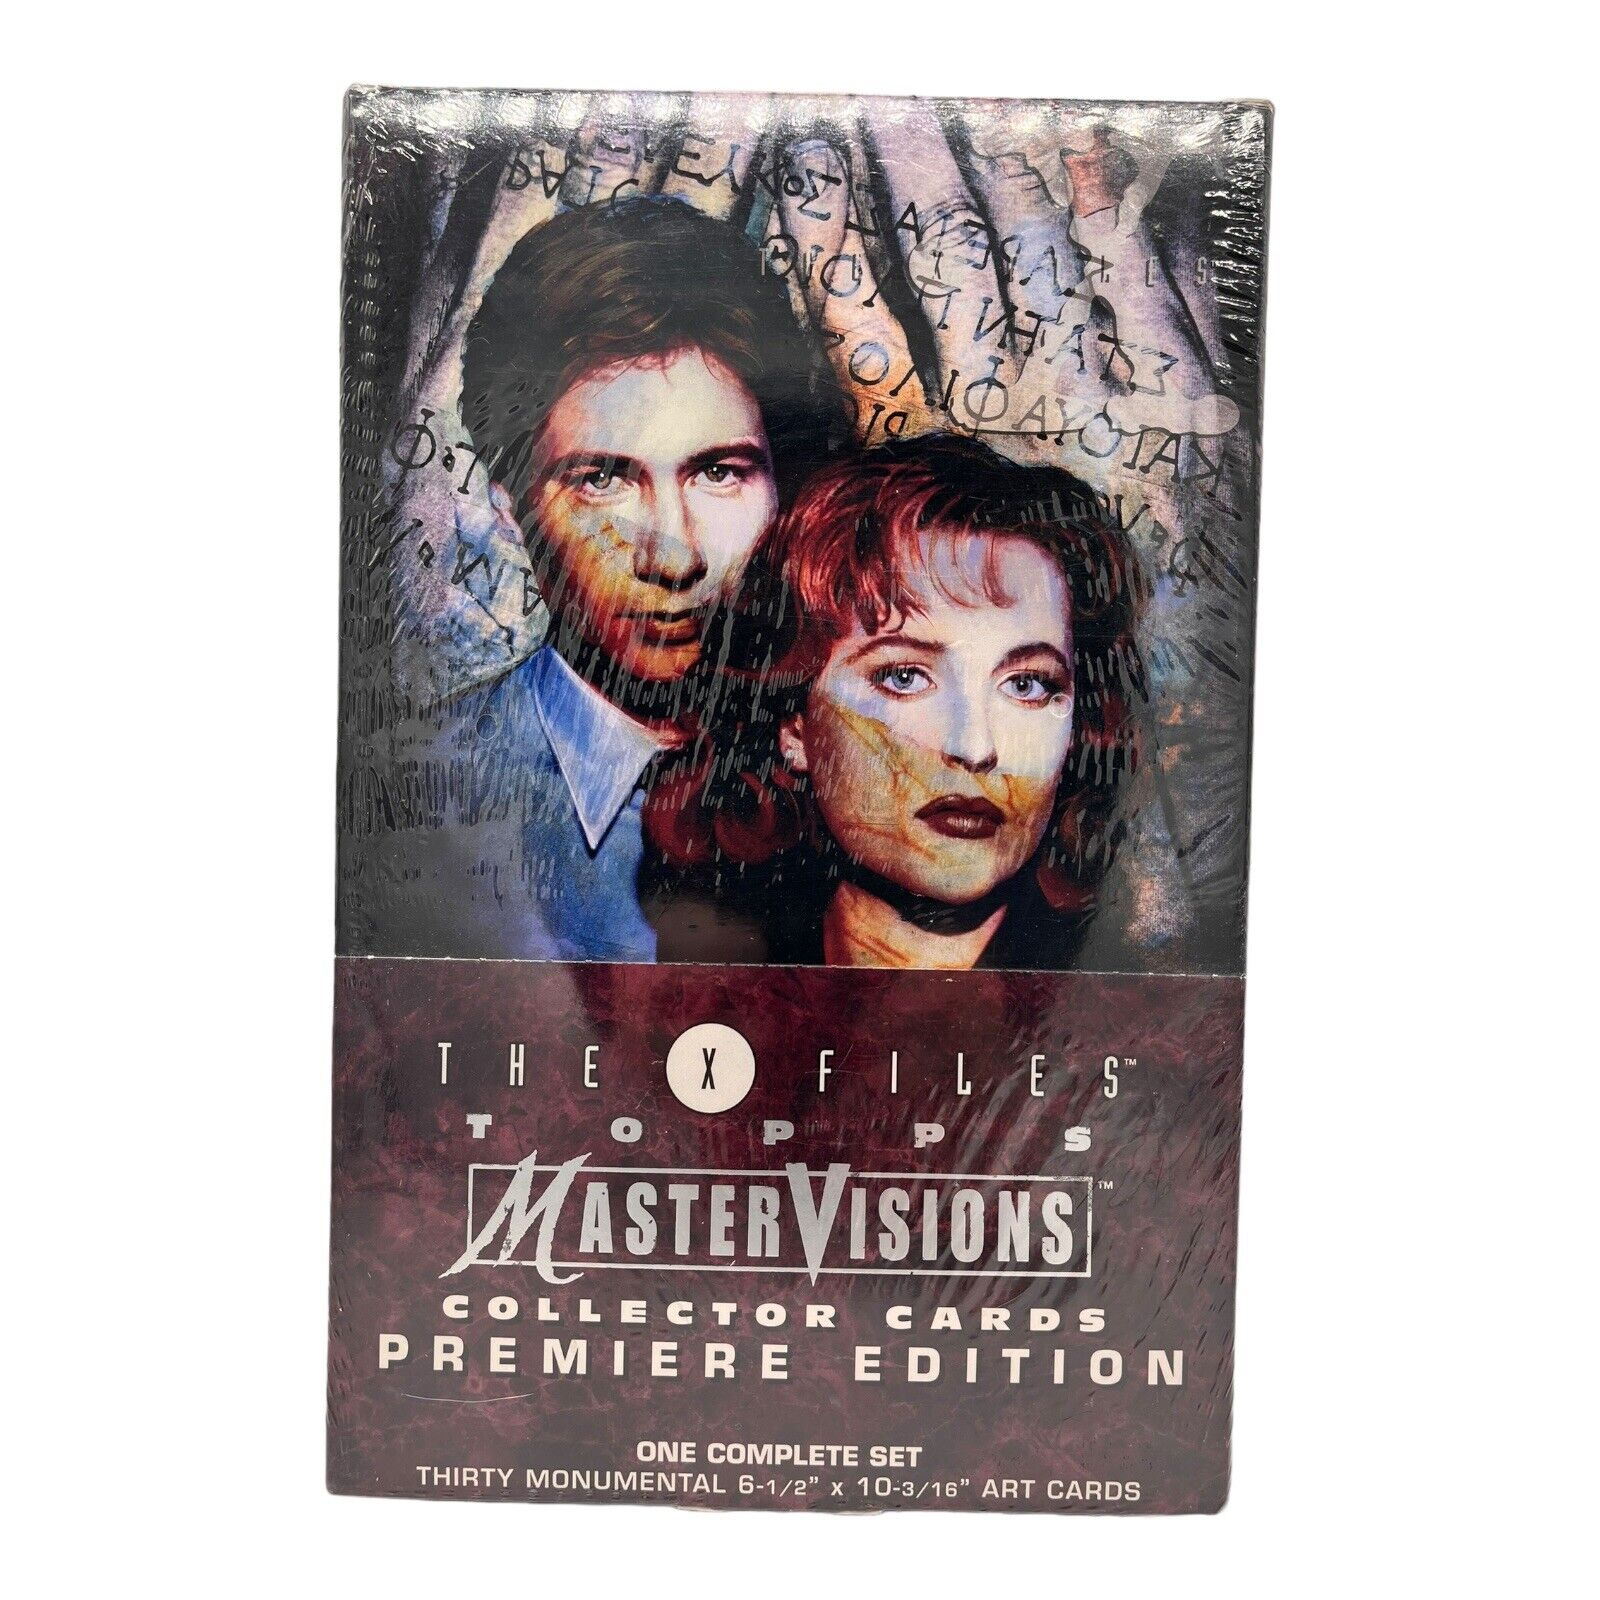 1995 Topps The X-Files *SEALED* MasterVisions Collector Cards Premiere Edition